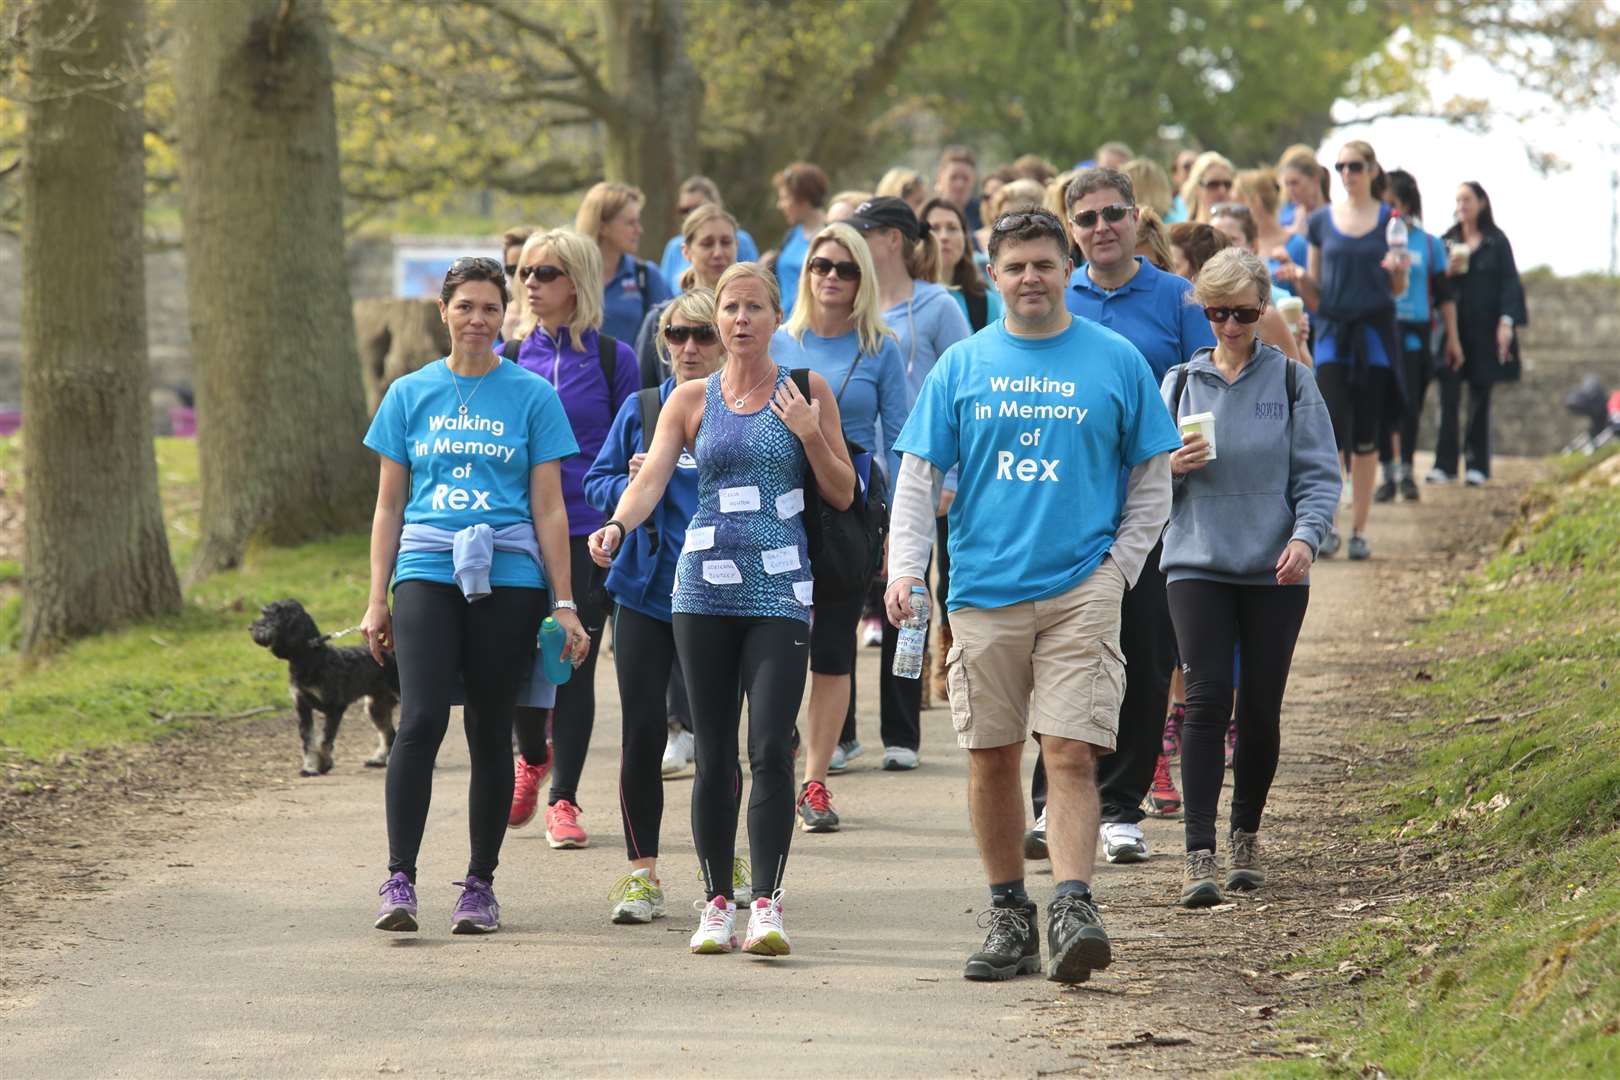 The 15k charity walk took place in memory of Rex who passed away in his sleep. Pic: Martin Apps